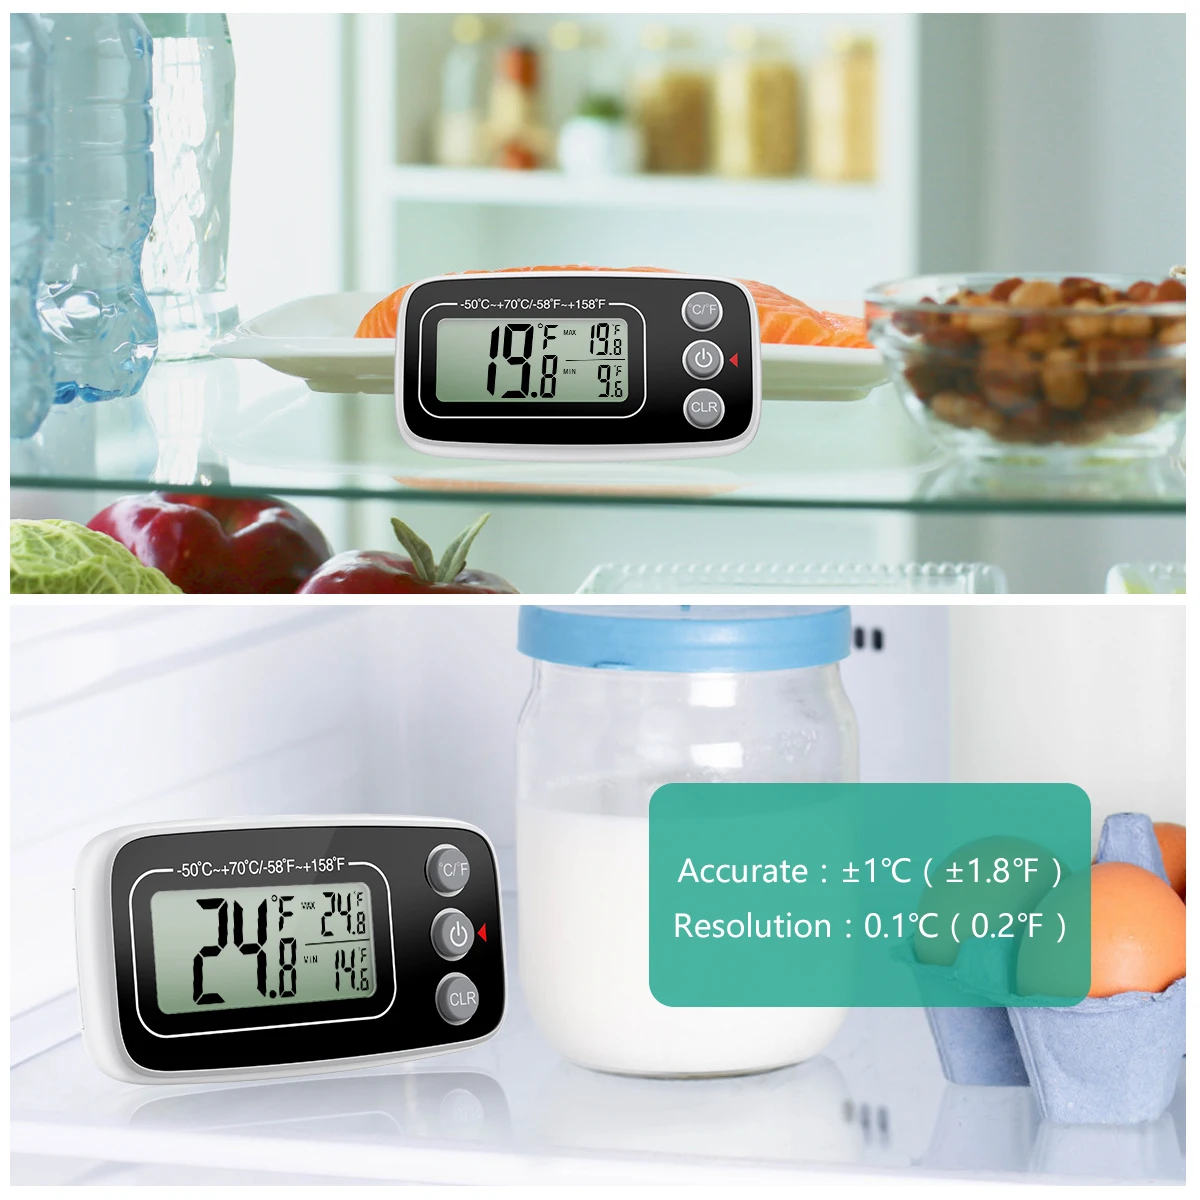 1pc 3.5in X 1.8in Waterproof Refrigerator Fridge Thermometer